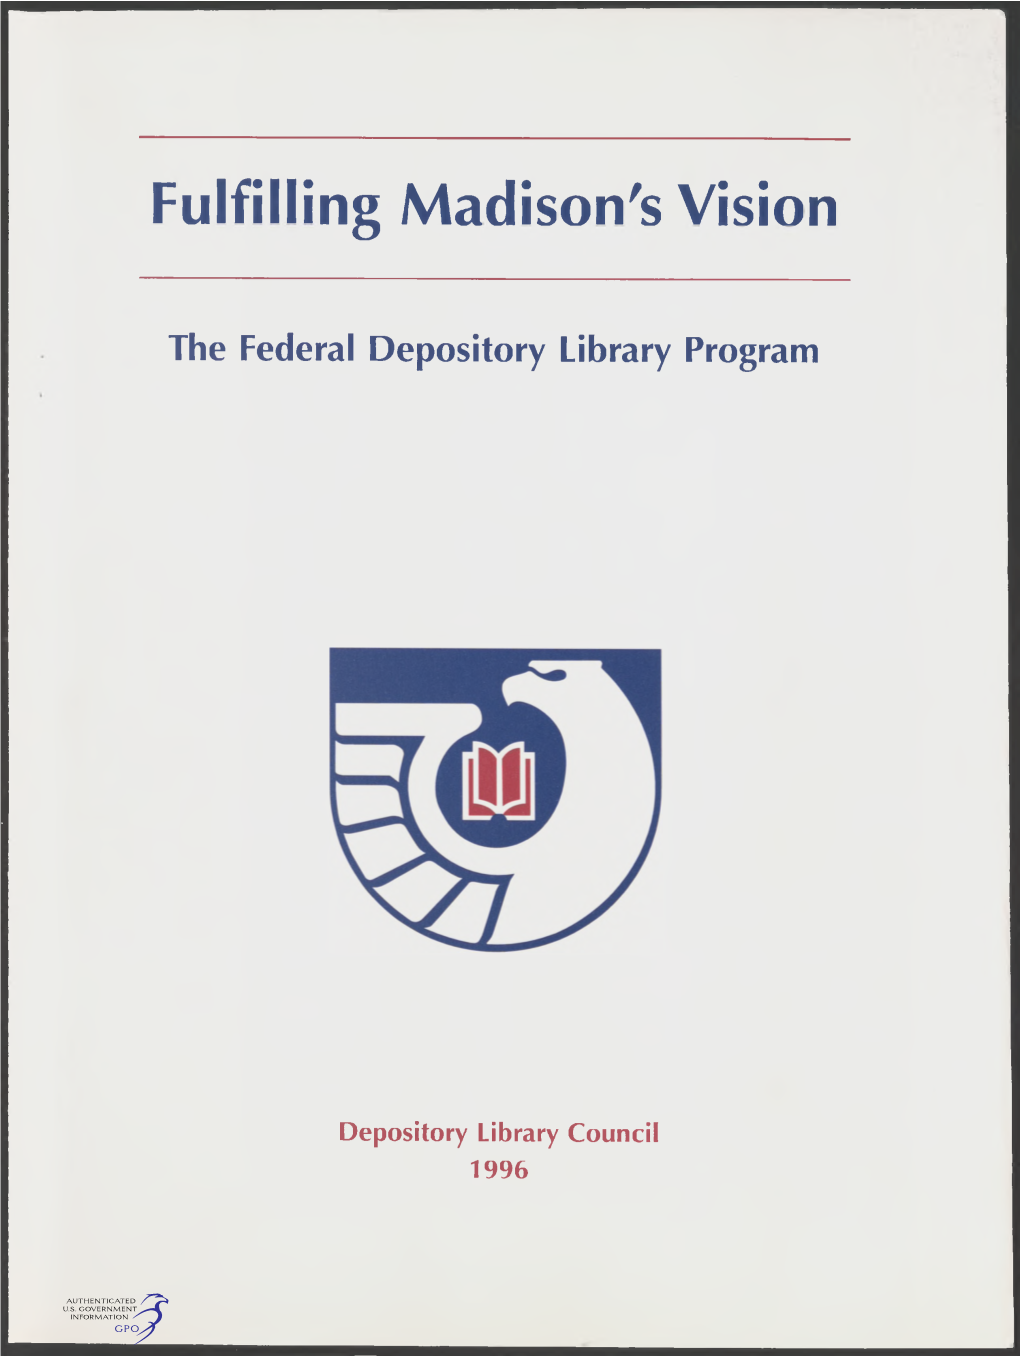 The Federal Depository Library Program